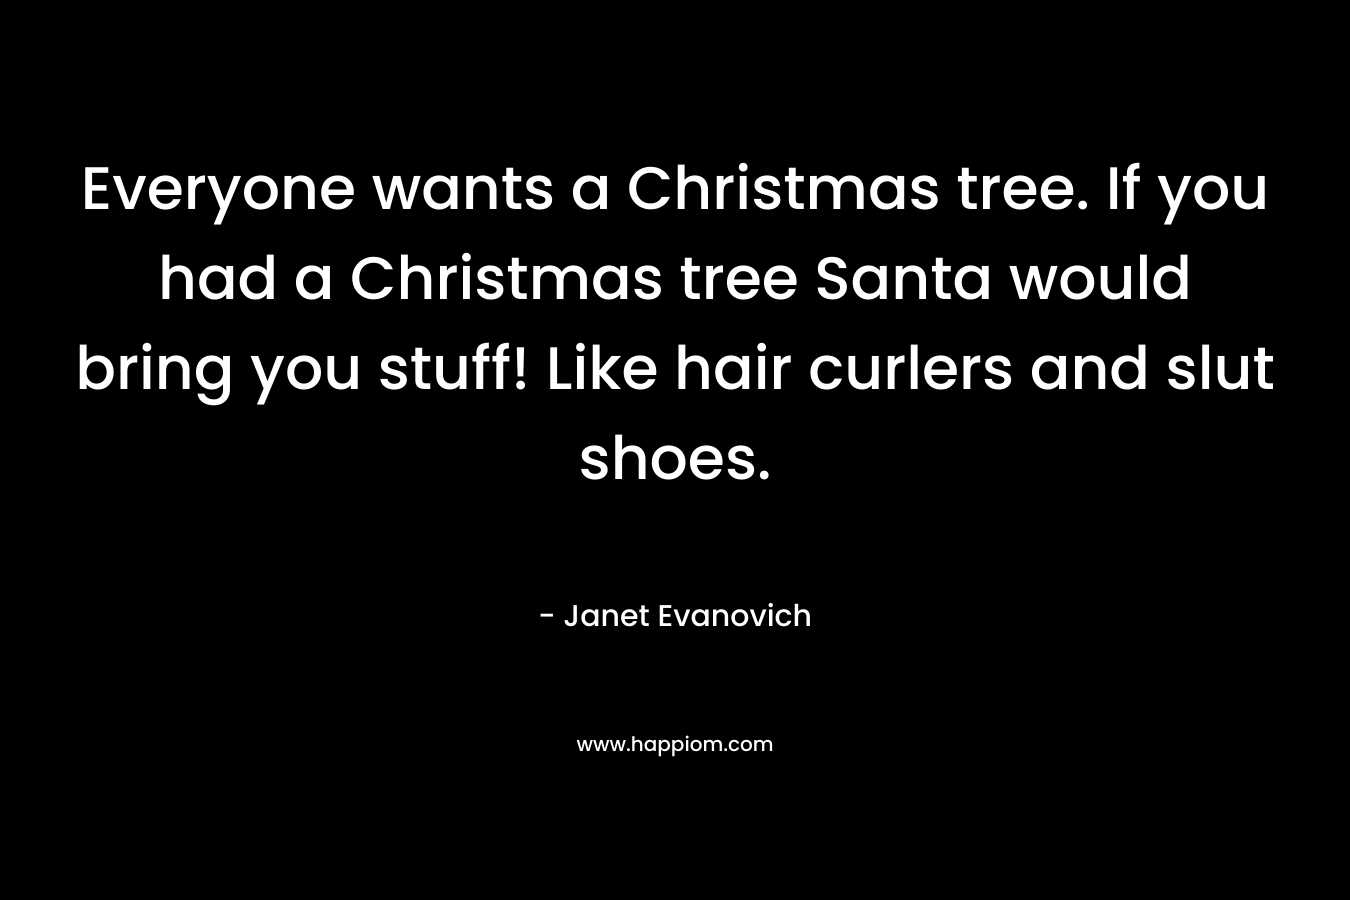 Everyone wants a Christmas tree. If you had a Christmas tree Santa would bring you stuff! Like hair curlers and slut shoes.